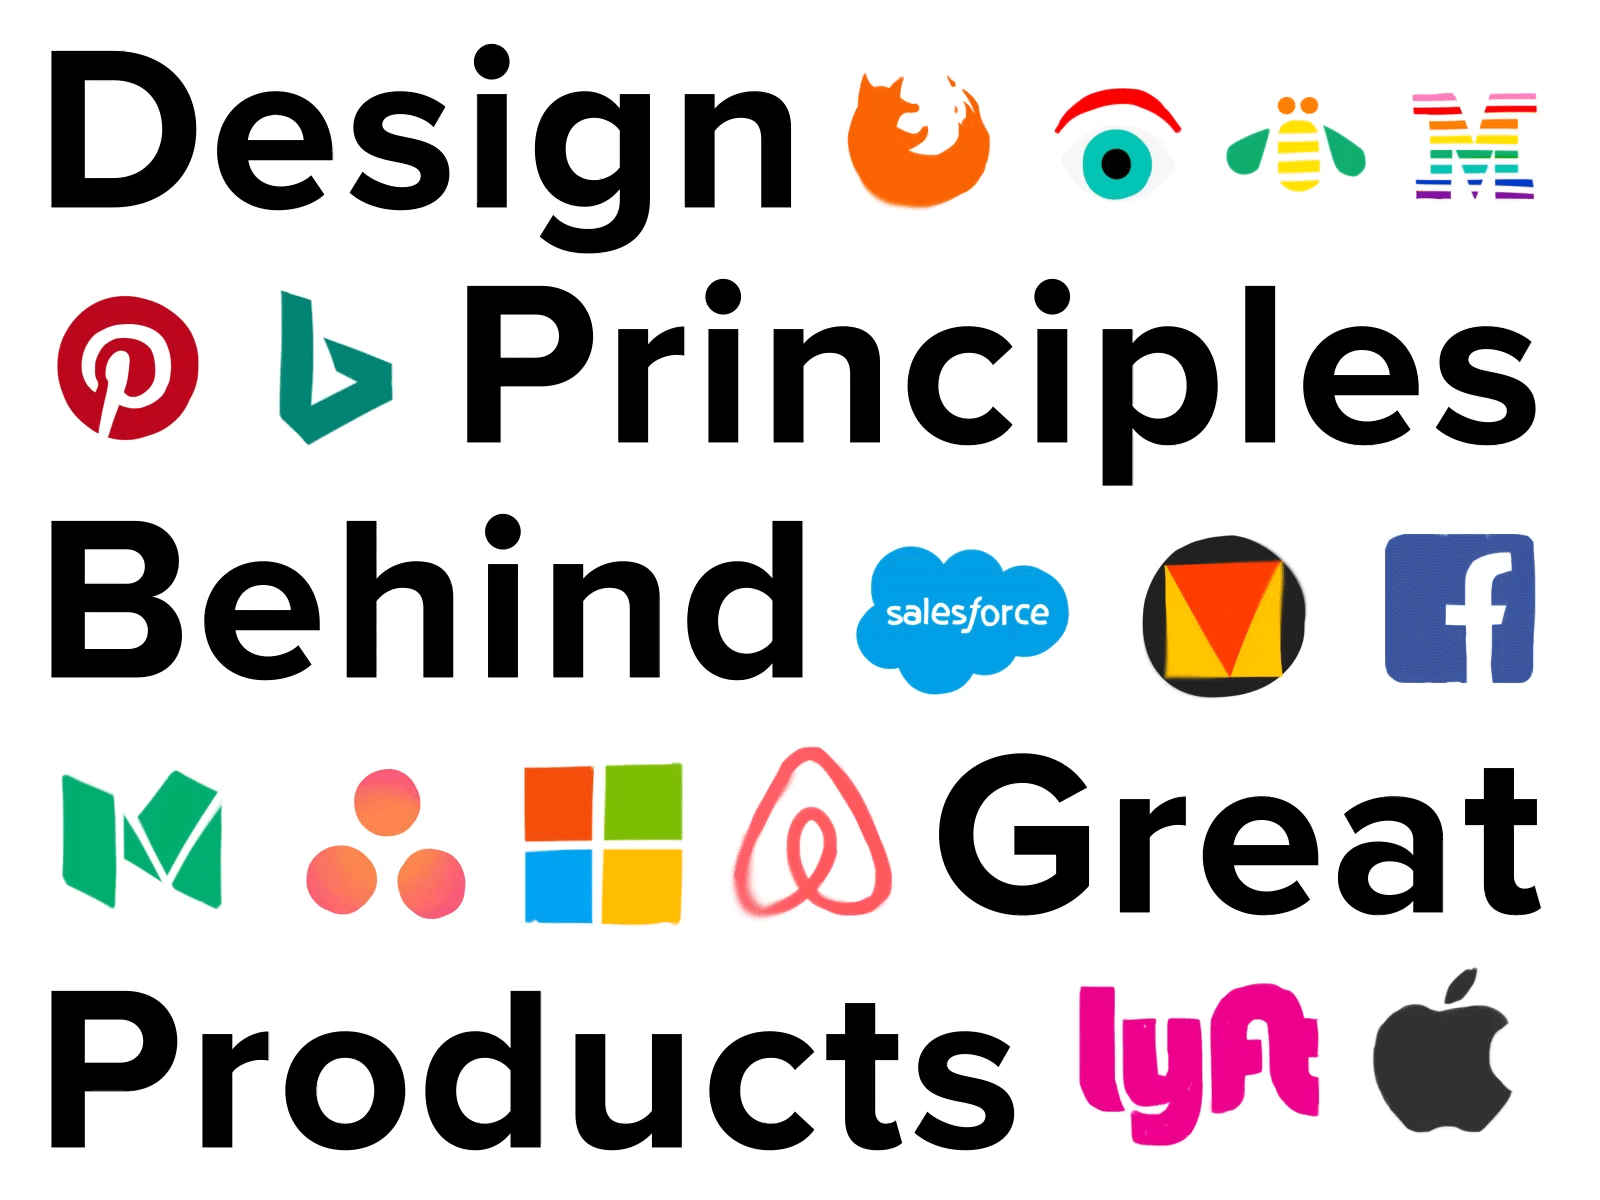 Design principles behind Great products